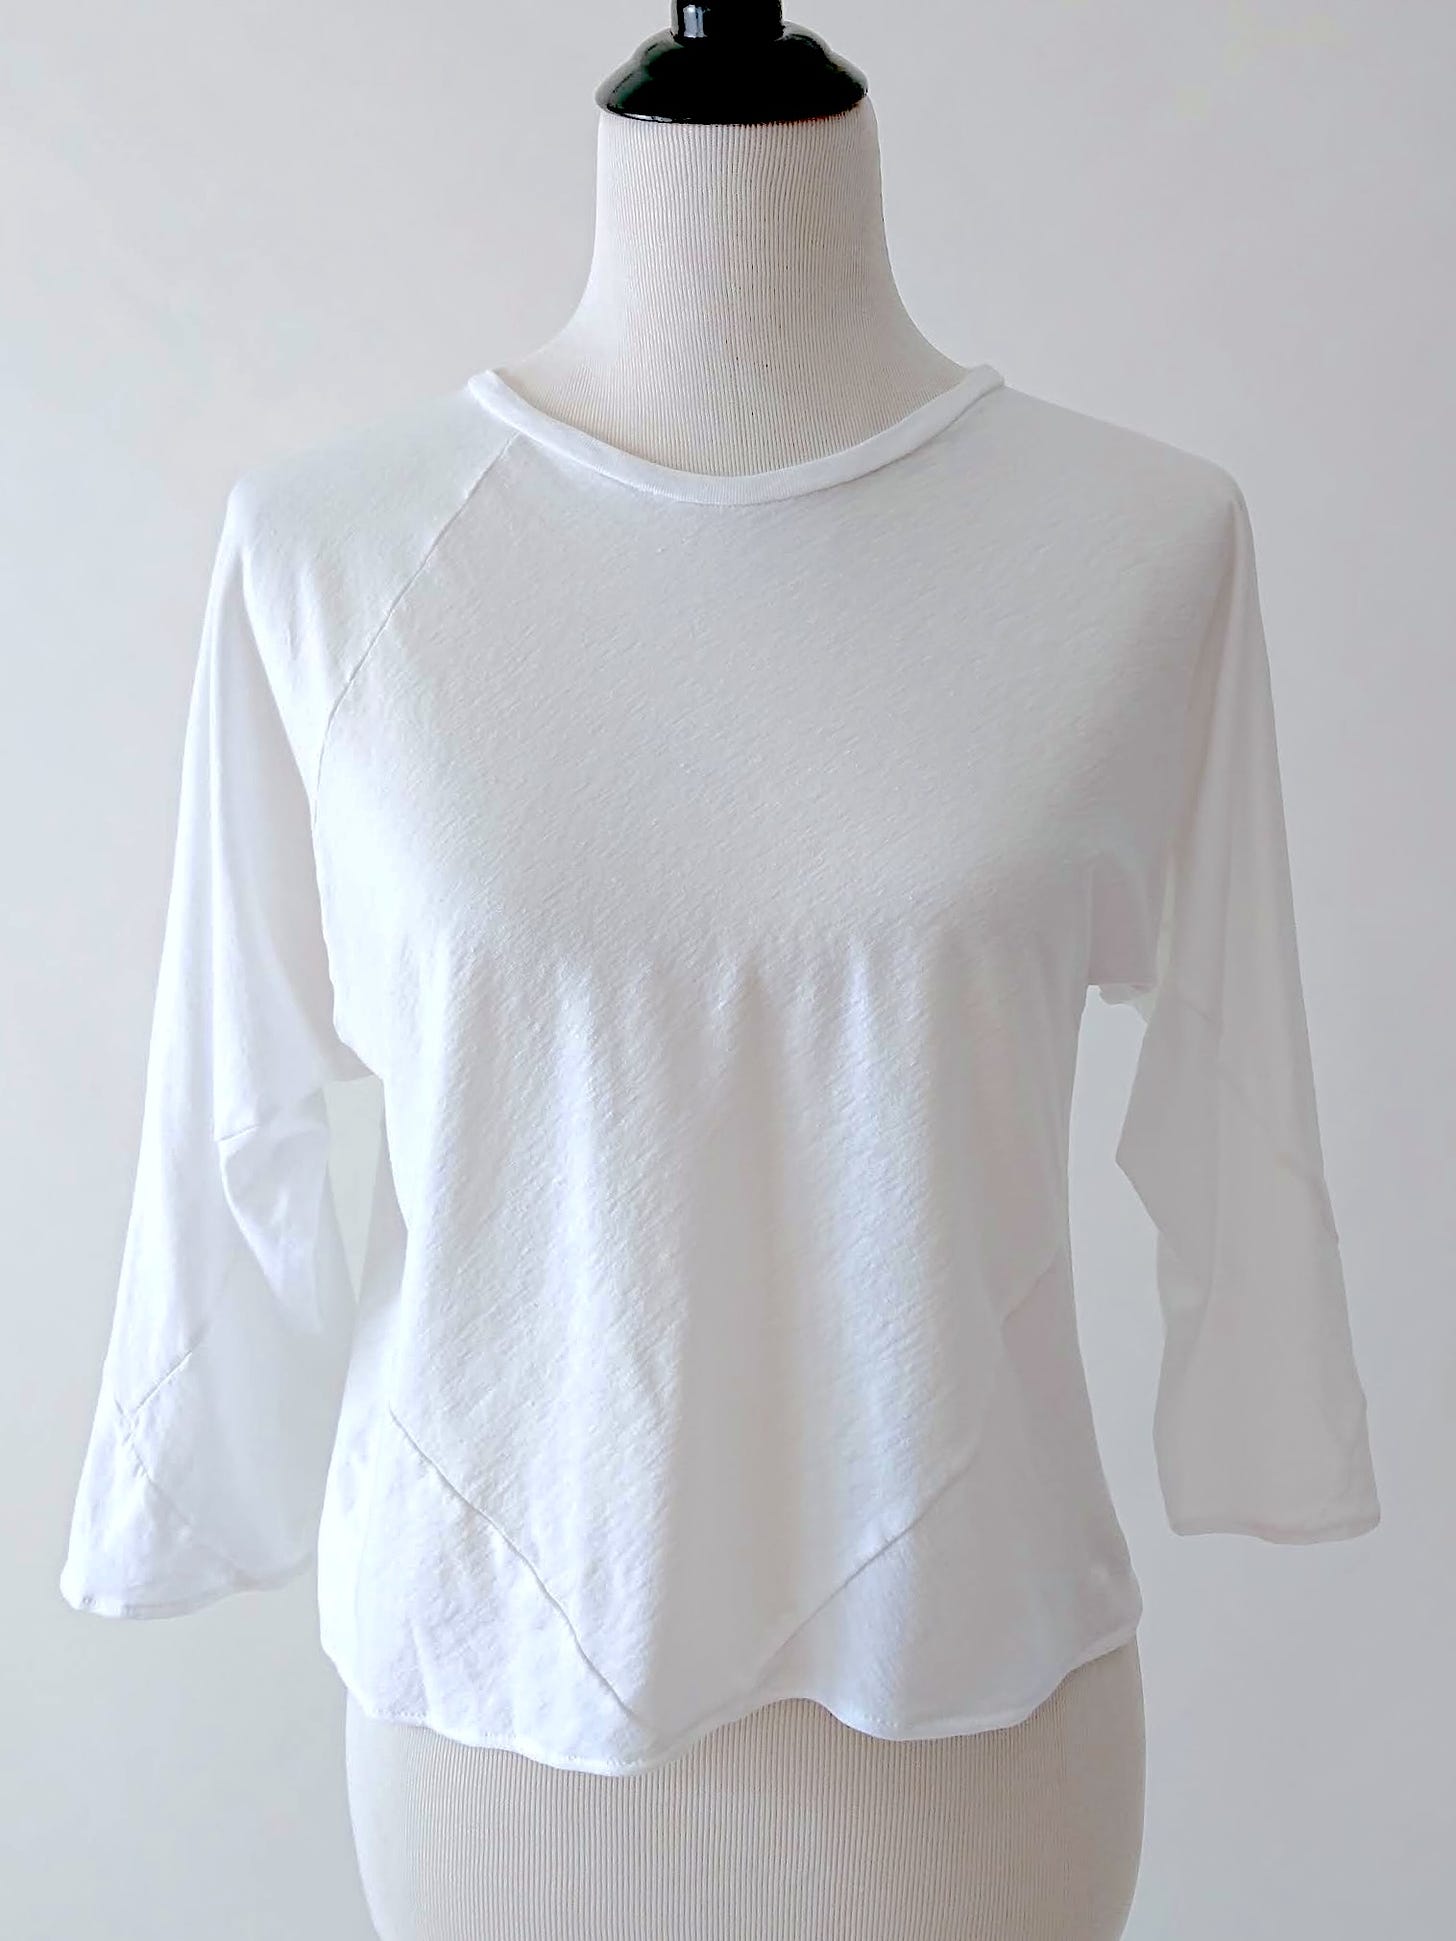 Front view of the 6-Square Top in white C4 cotton jersey